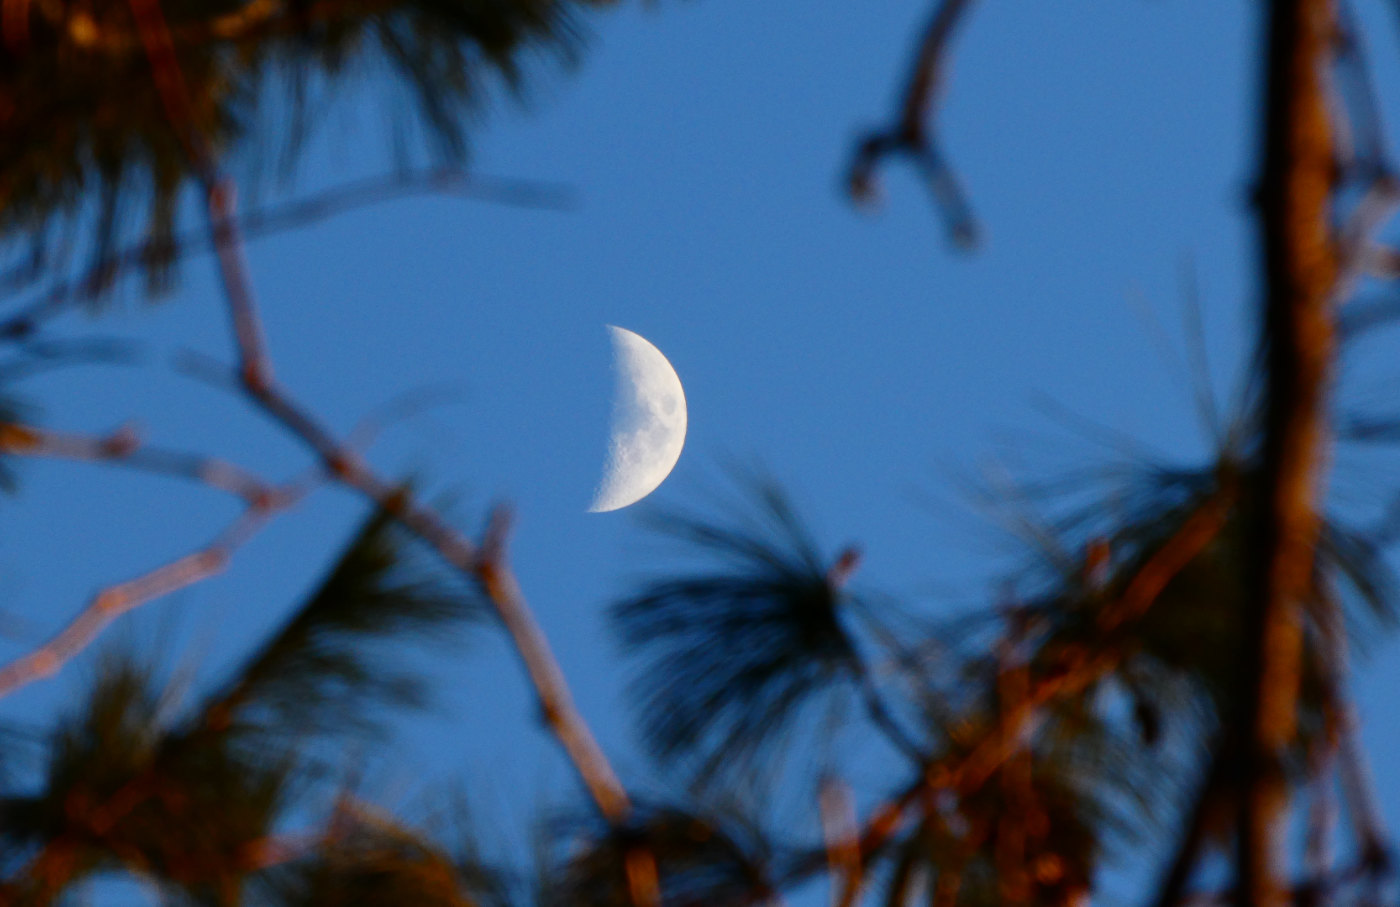 crescent moon in a deep blue sky with blurrred branches and evergreen needles in foreground